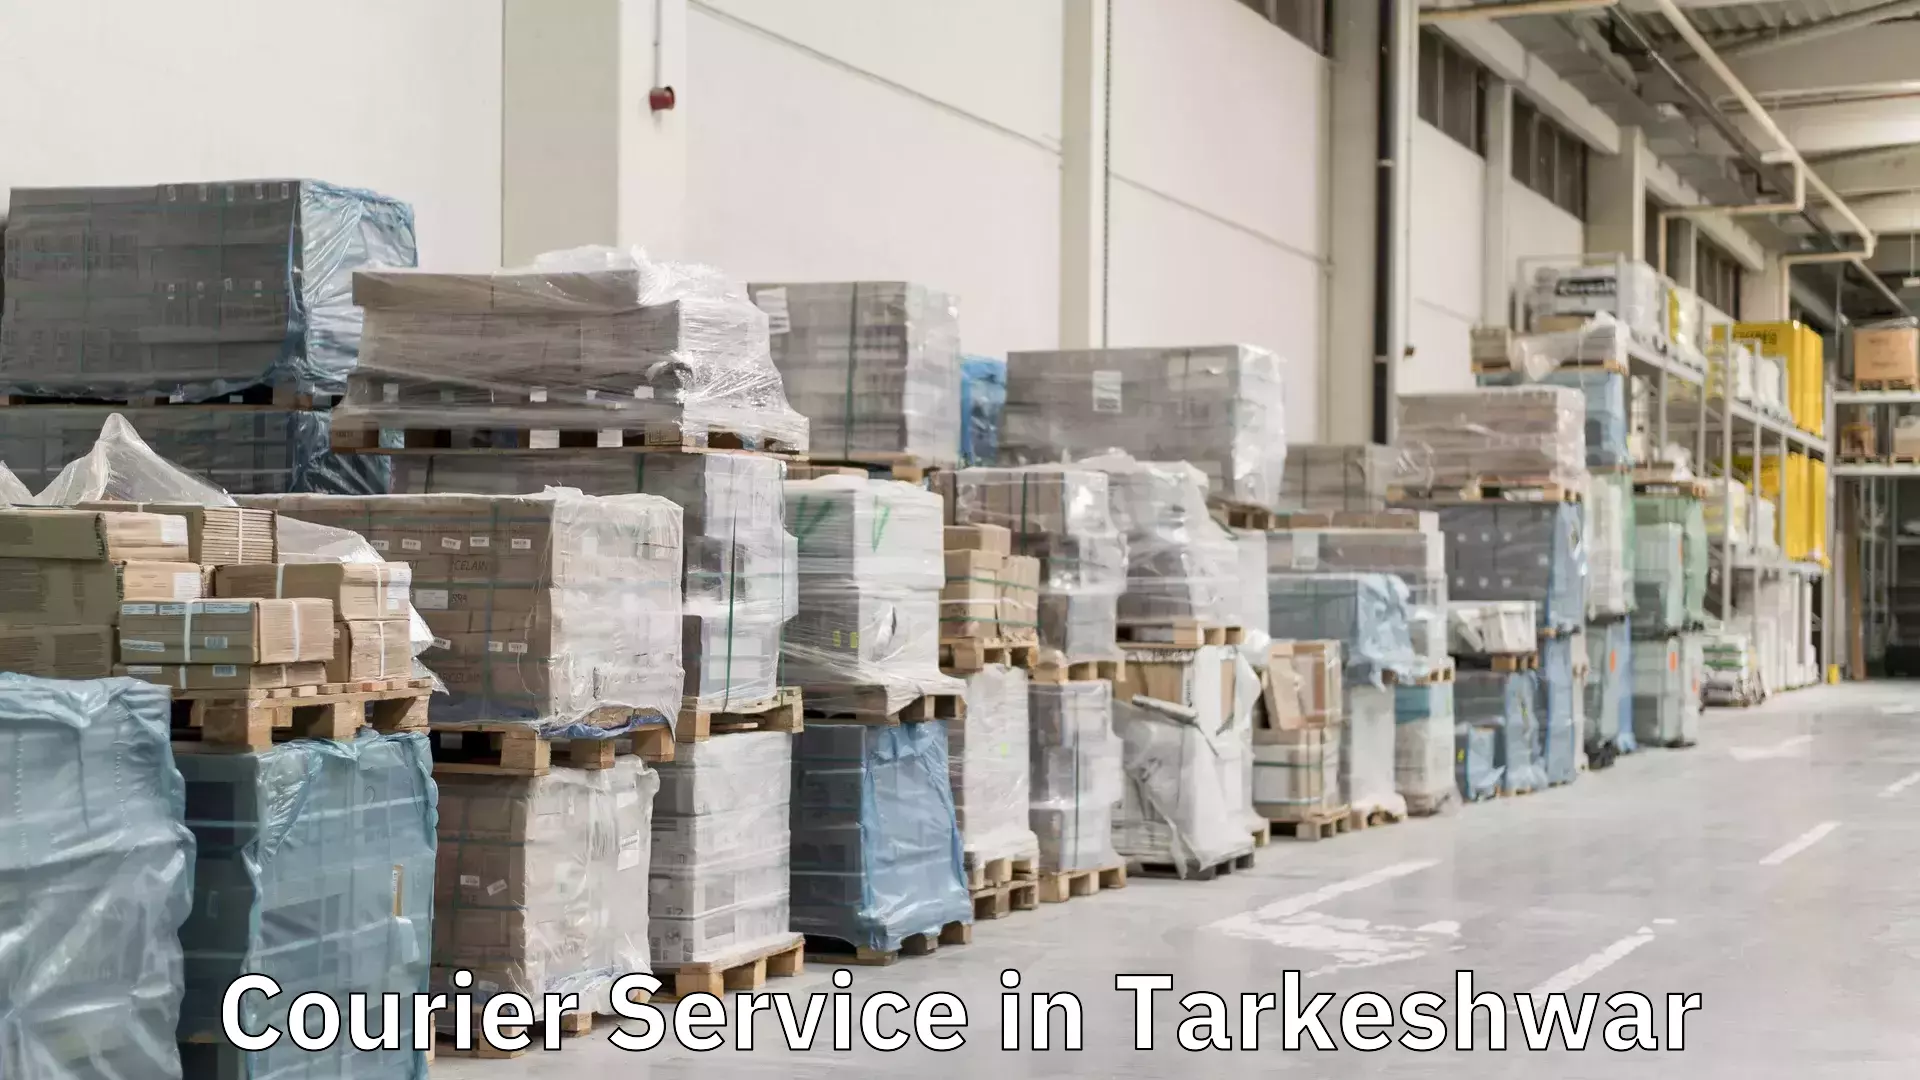 Automated shipping processes in Tarkeshwar